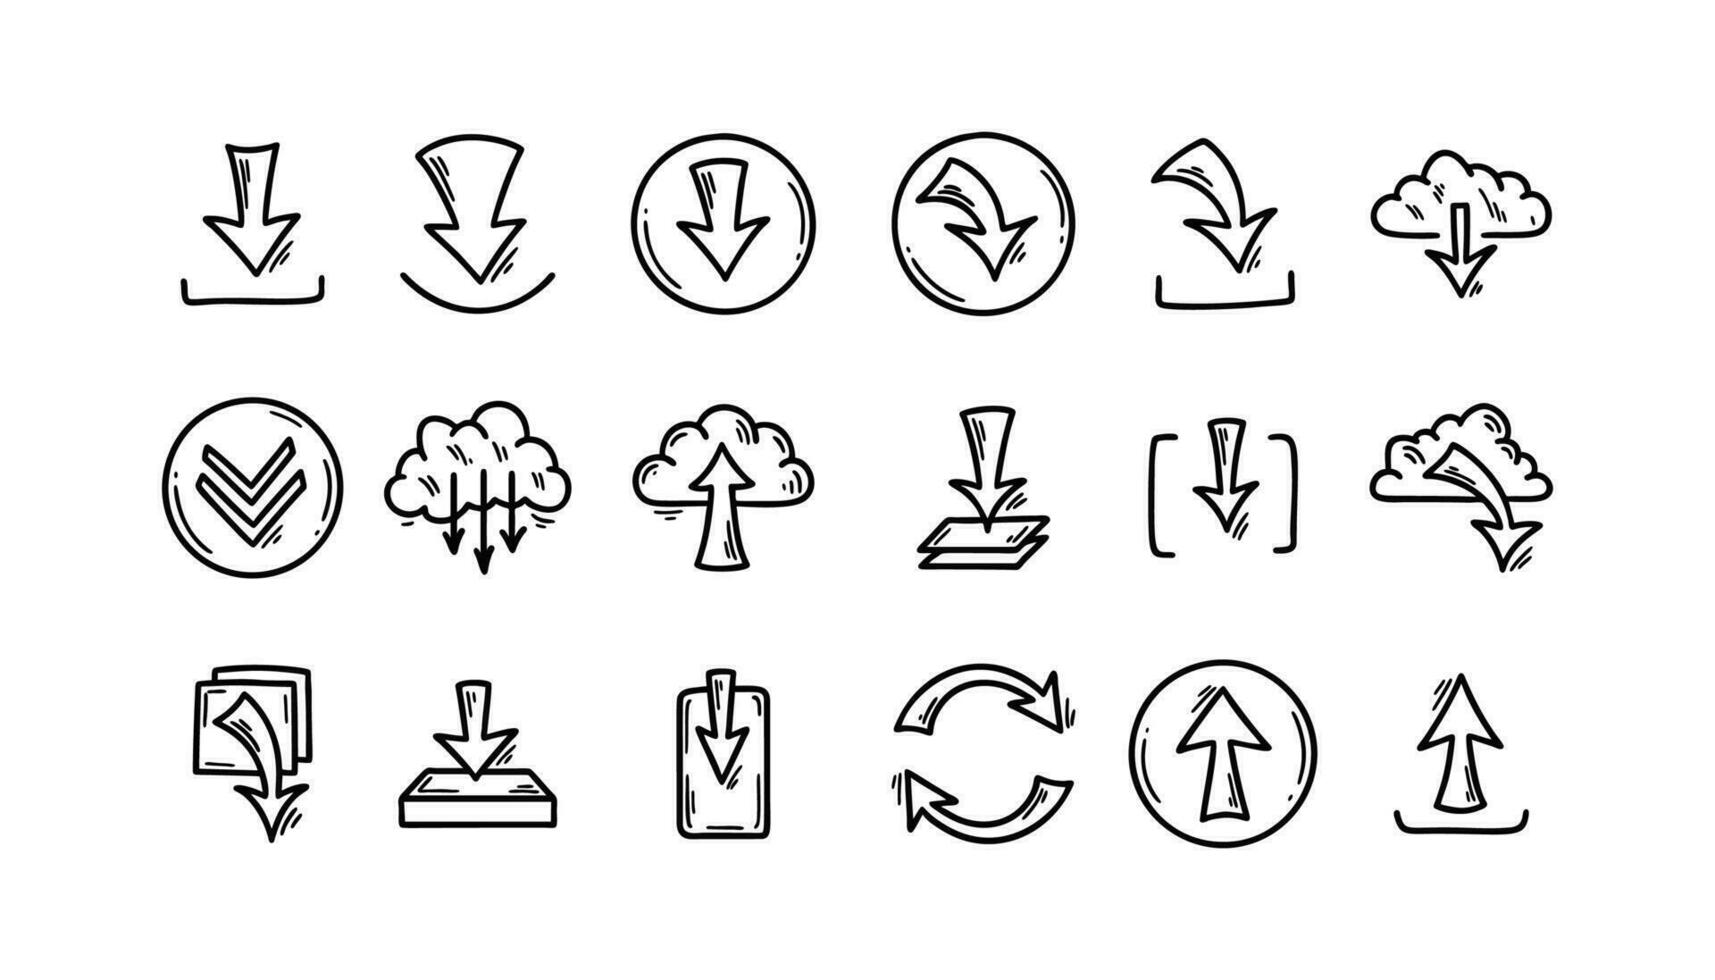 Download and upload file doodle icons set. Hand drawn sketch interface buttons. Cloud data server technology. Digital storage arrow pictogram vector